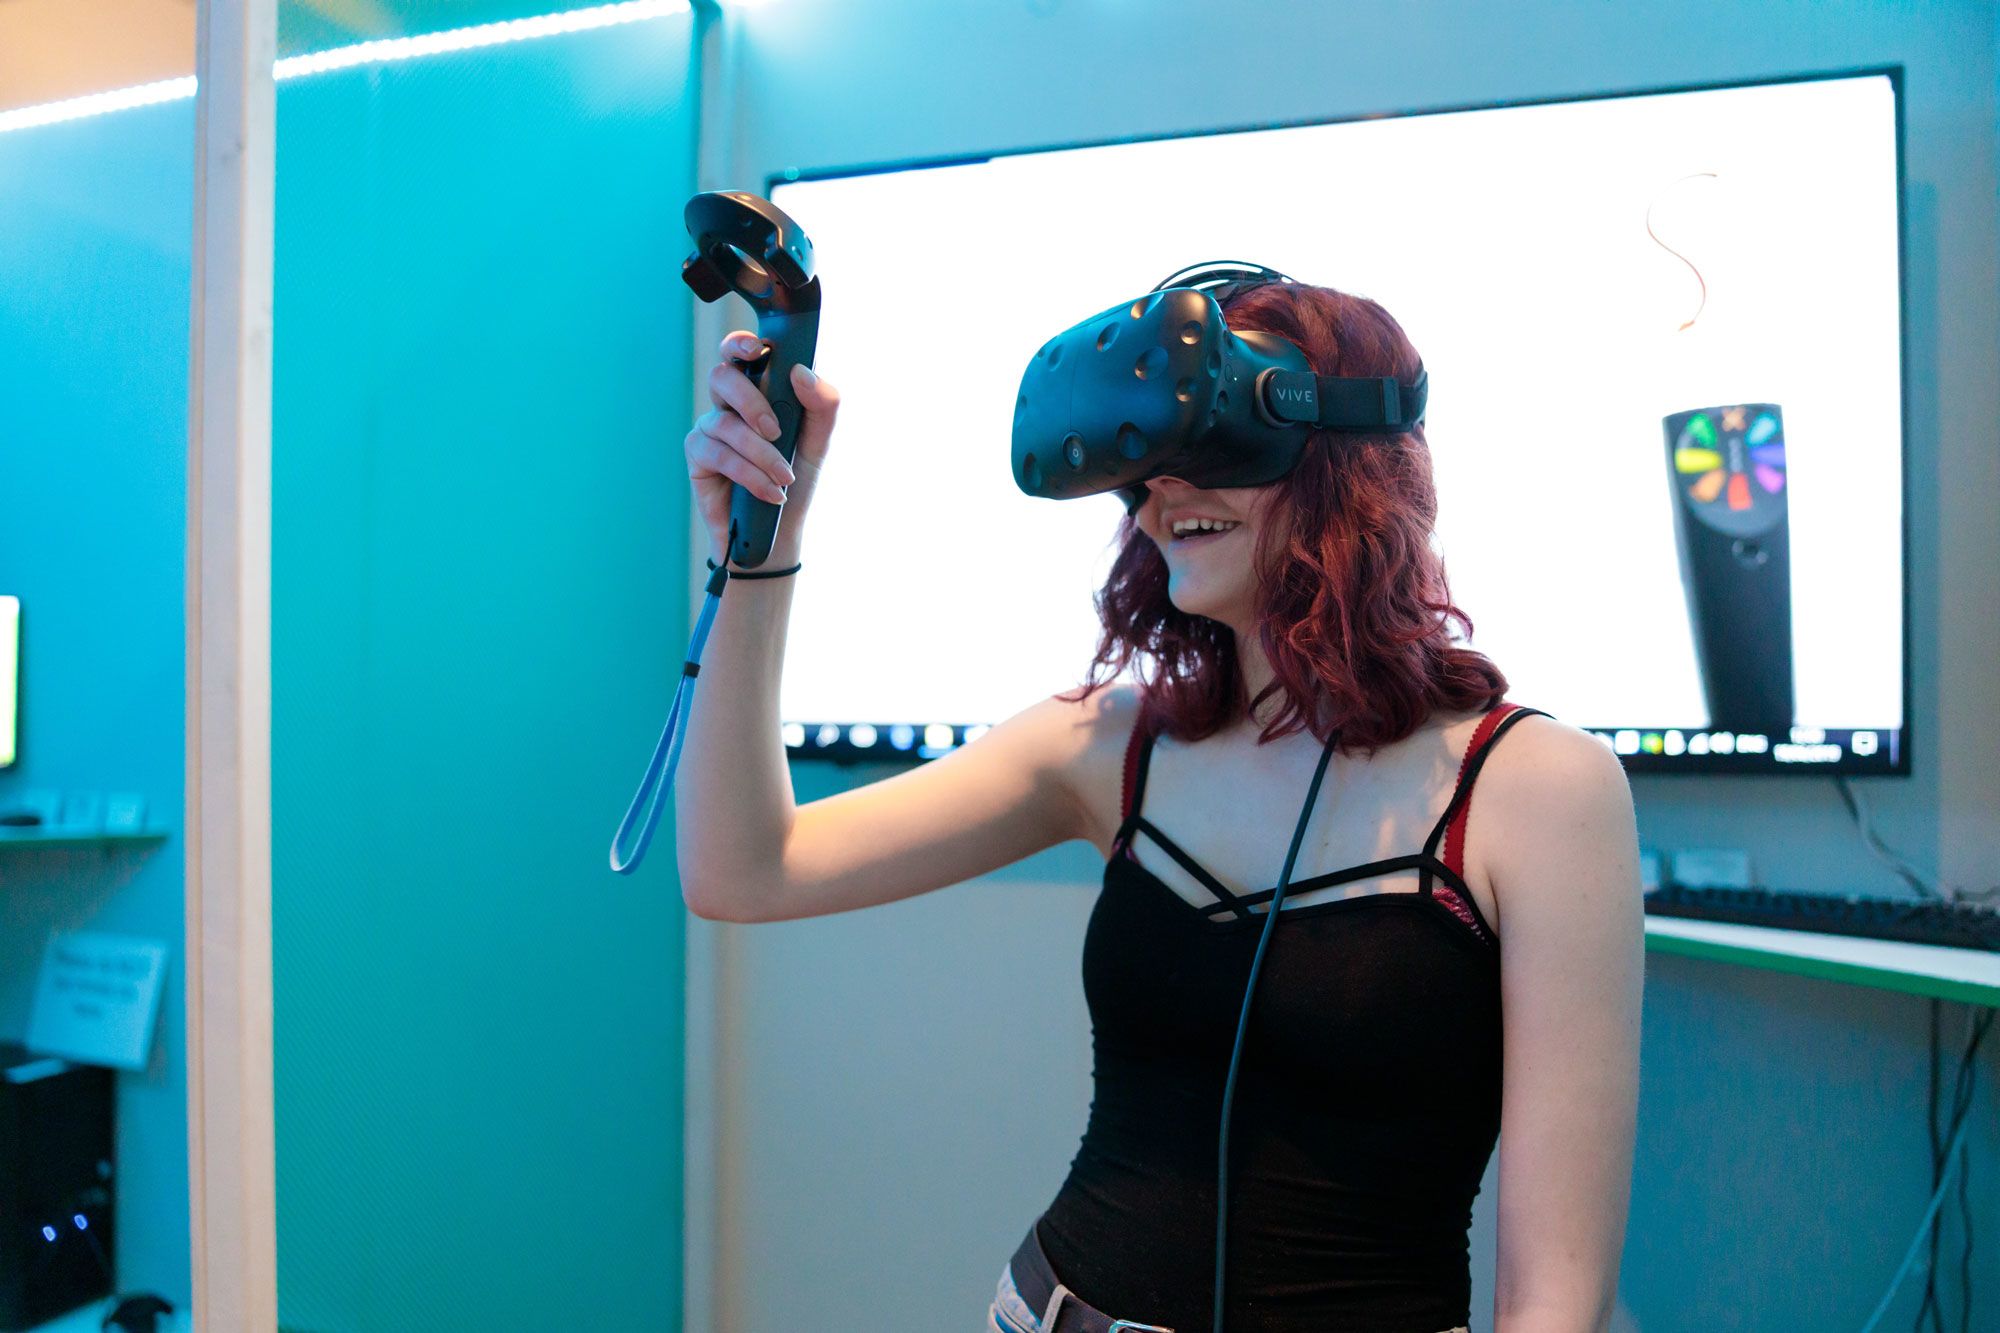 A girl in a black vest stop stands against a blue background wearing a VR headset and holding the controller in her hand, looking upwards.